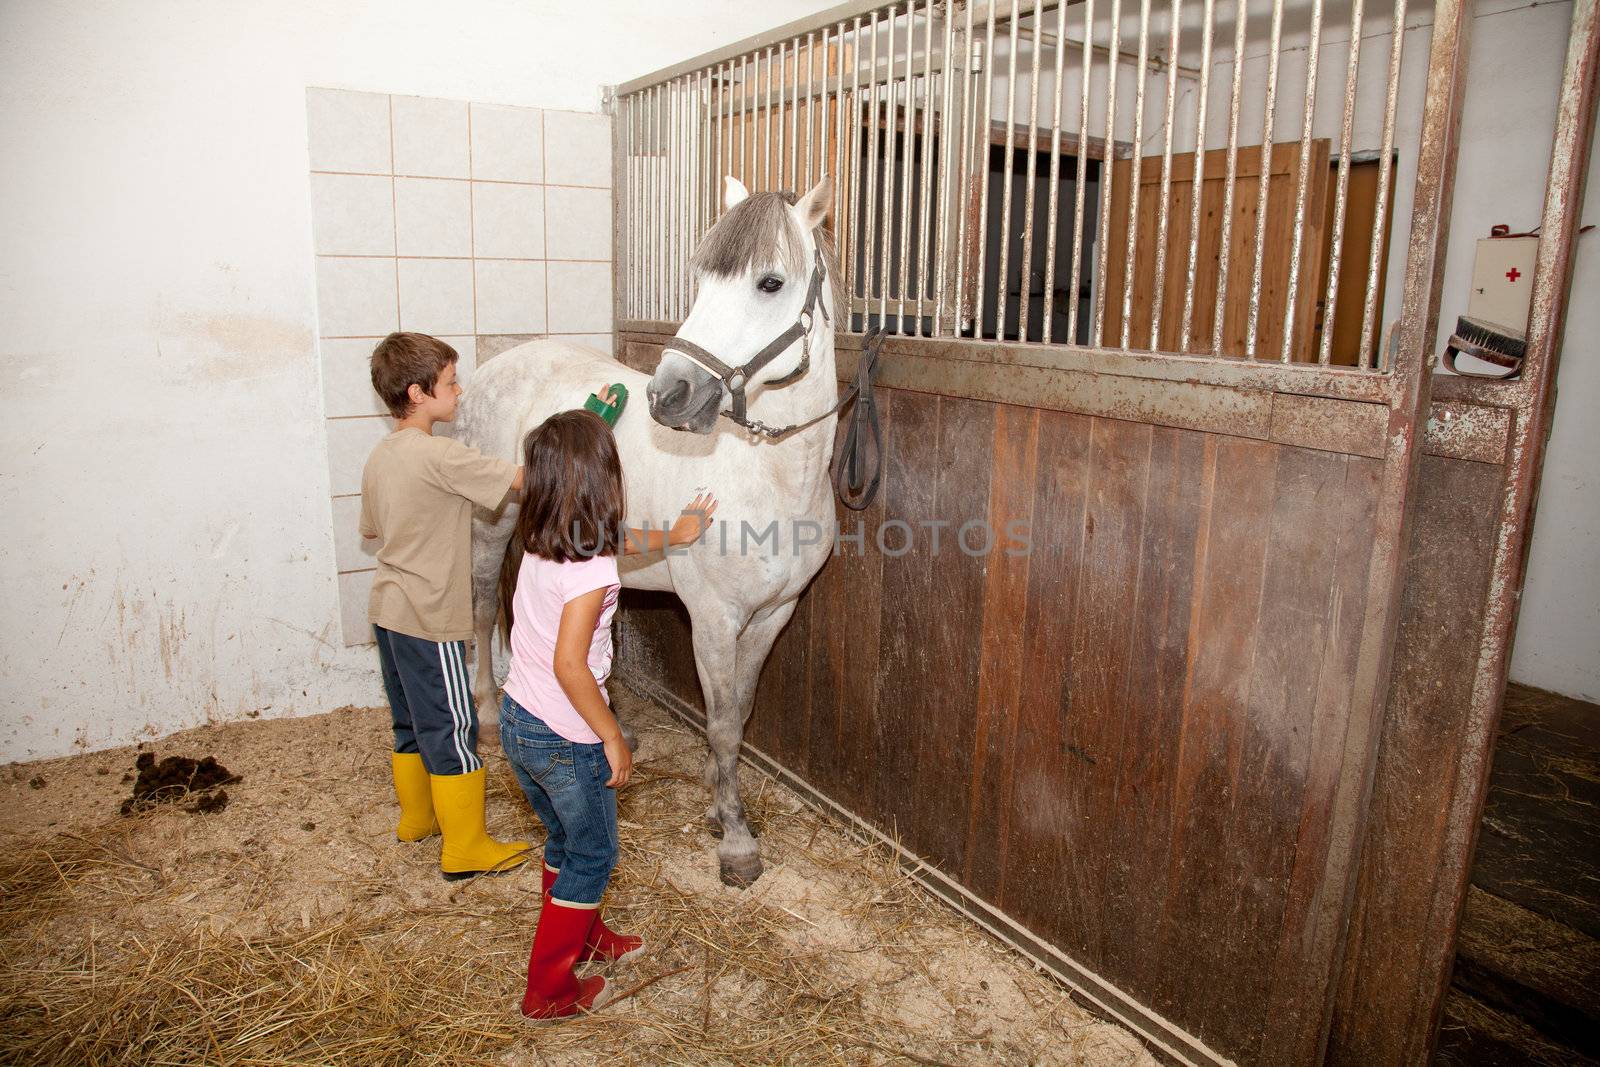 Little kids - boy and girl - grooming, cleaning aand taking care of a horse in a horse stall.